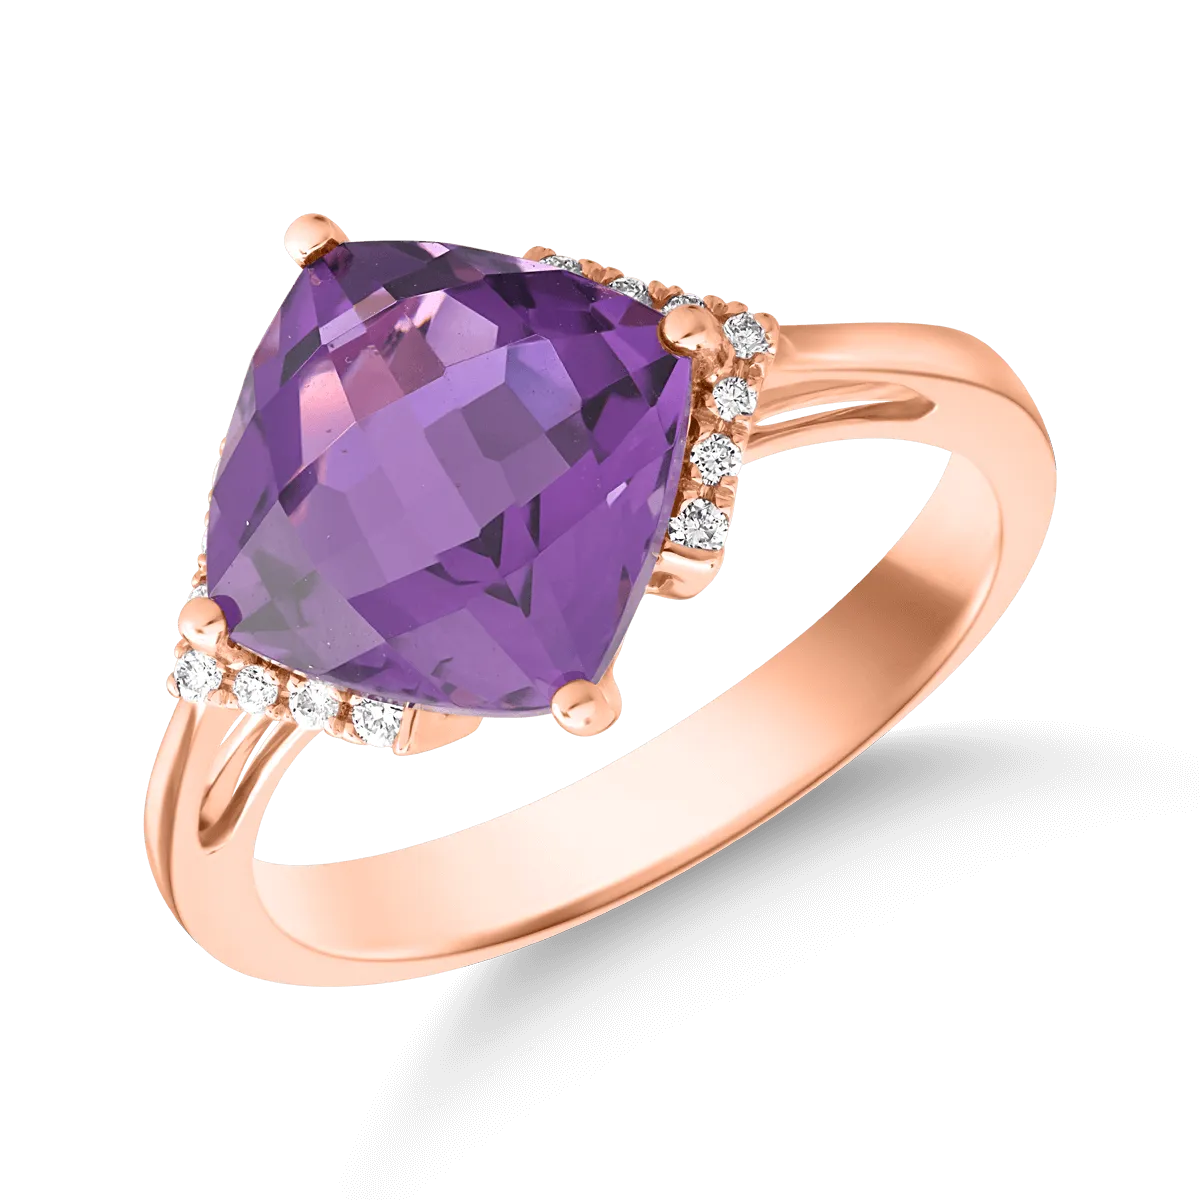 18K rose gold ring with 3.8ct amethyst and 0.08ct diamonds